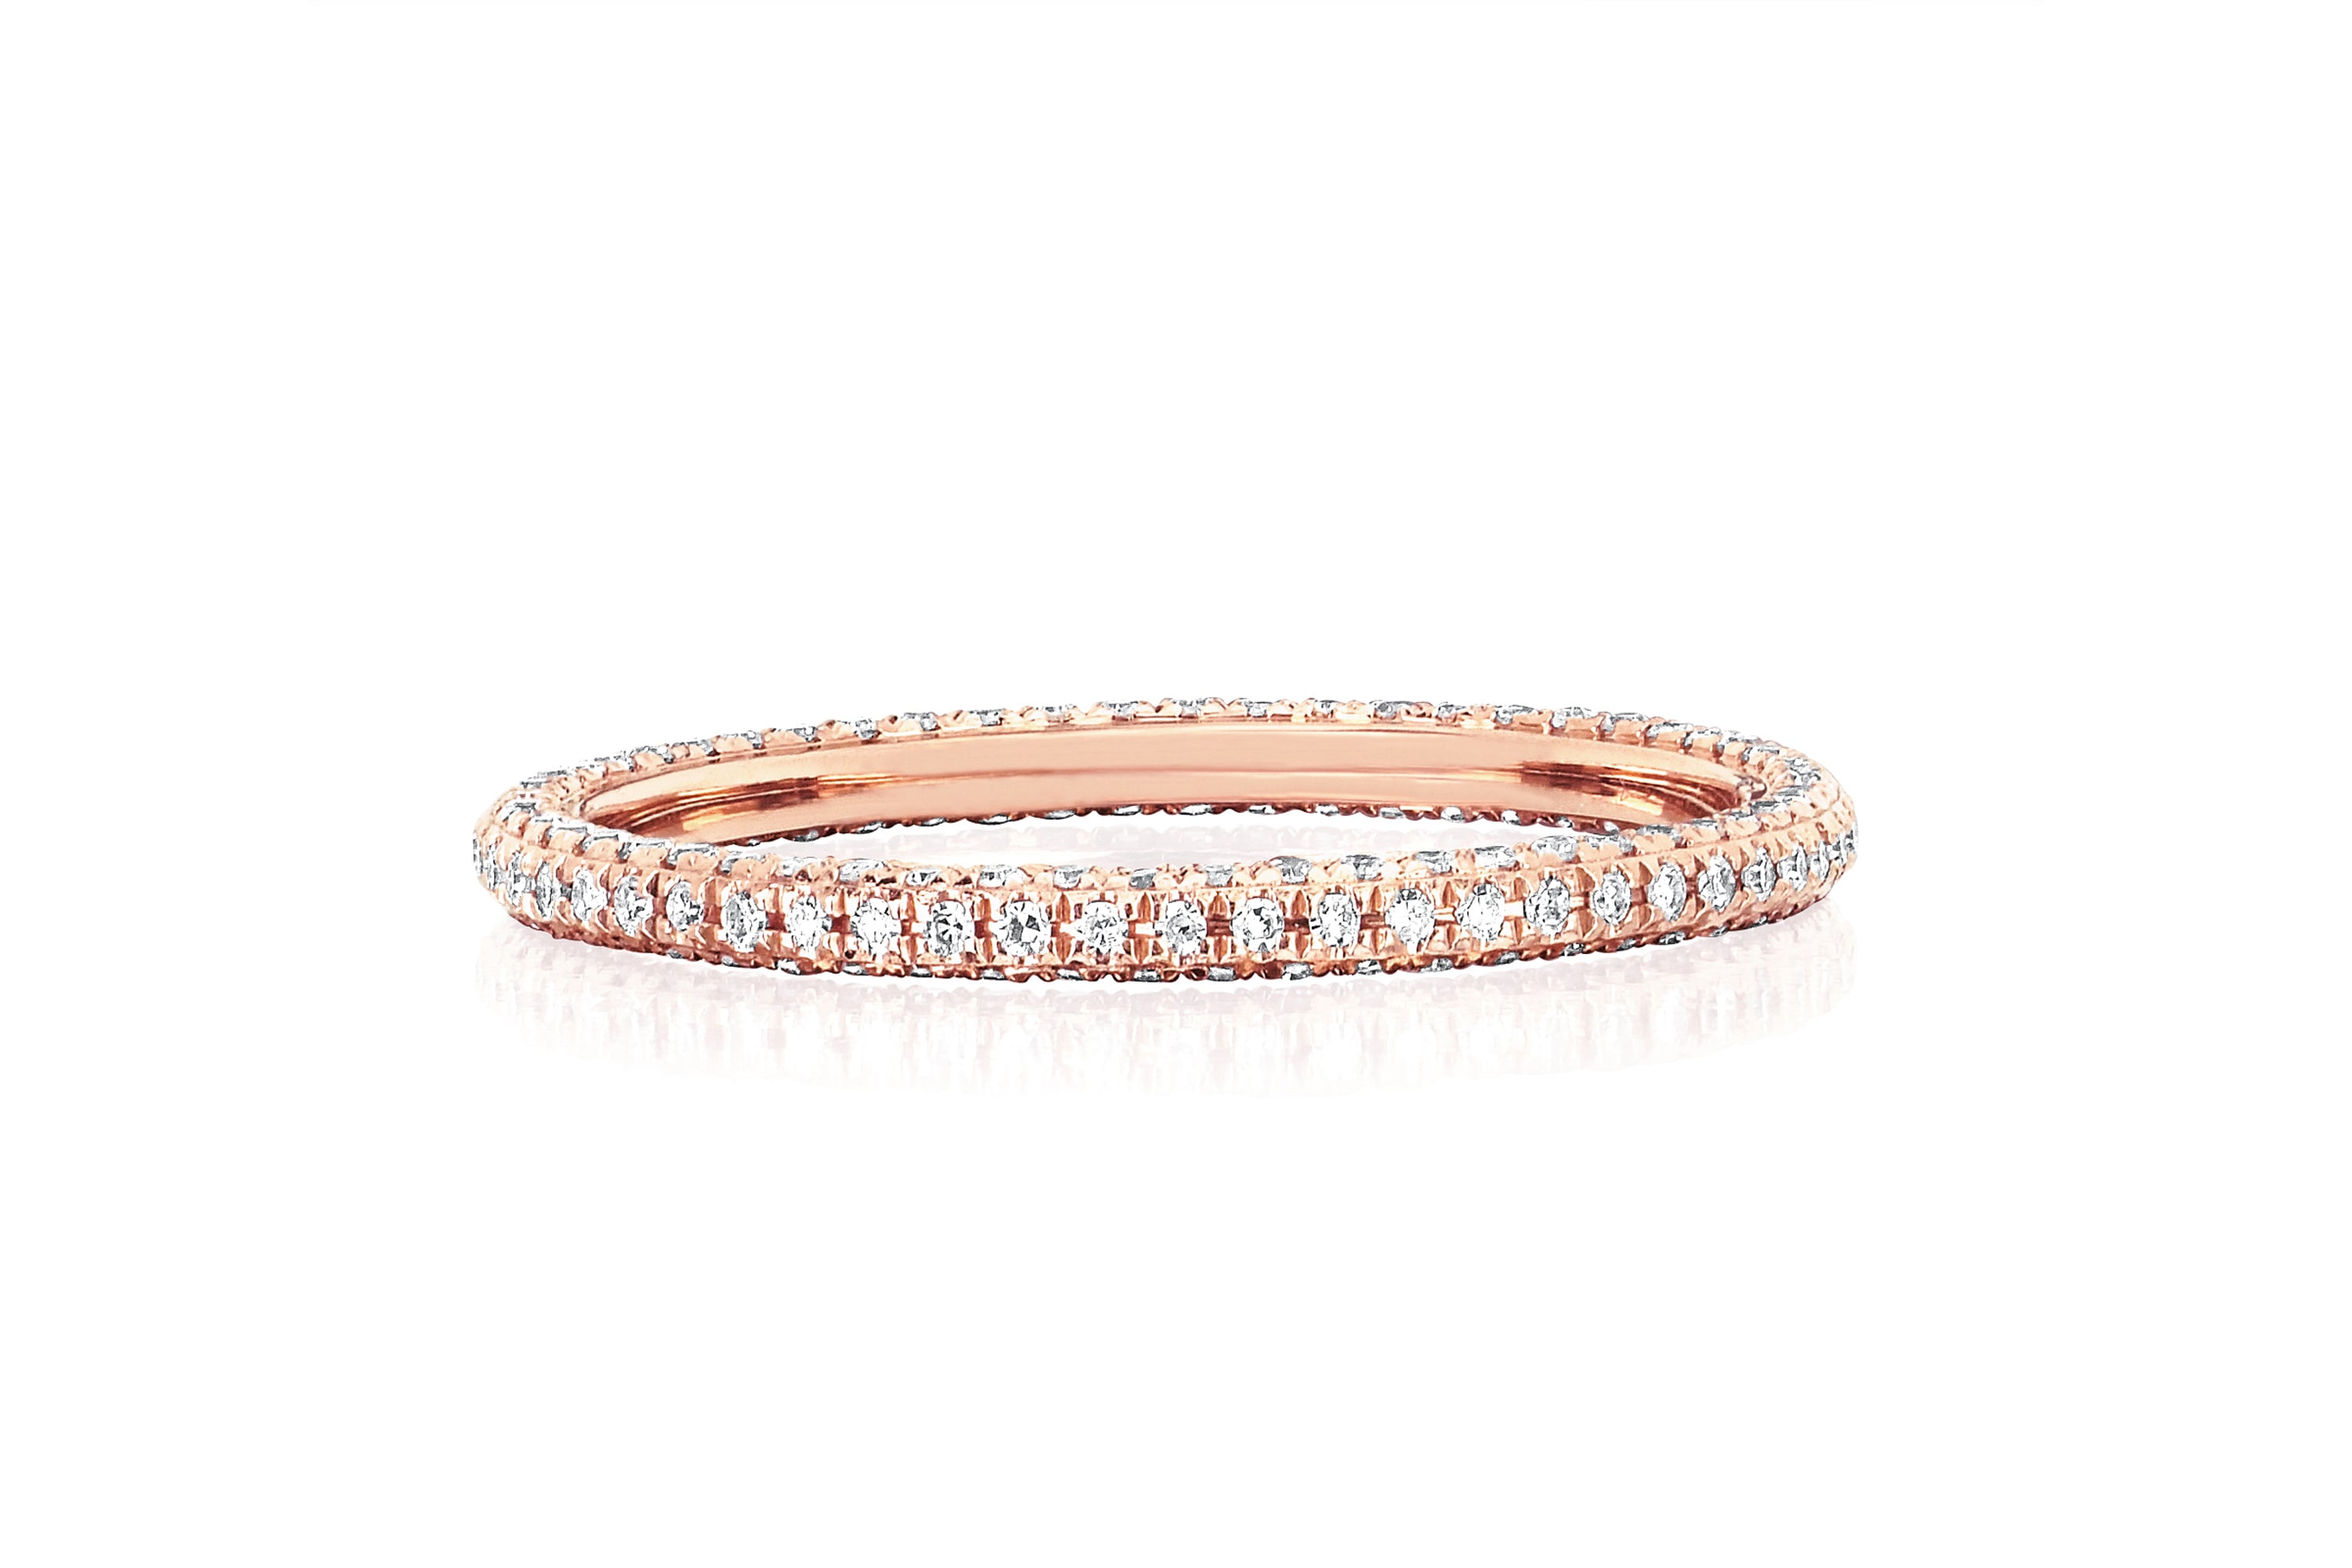 3 Sided Diamond Eternity Band Ring in 14k rose gold